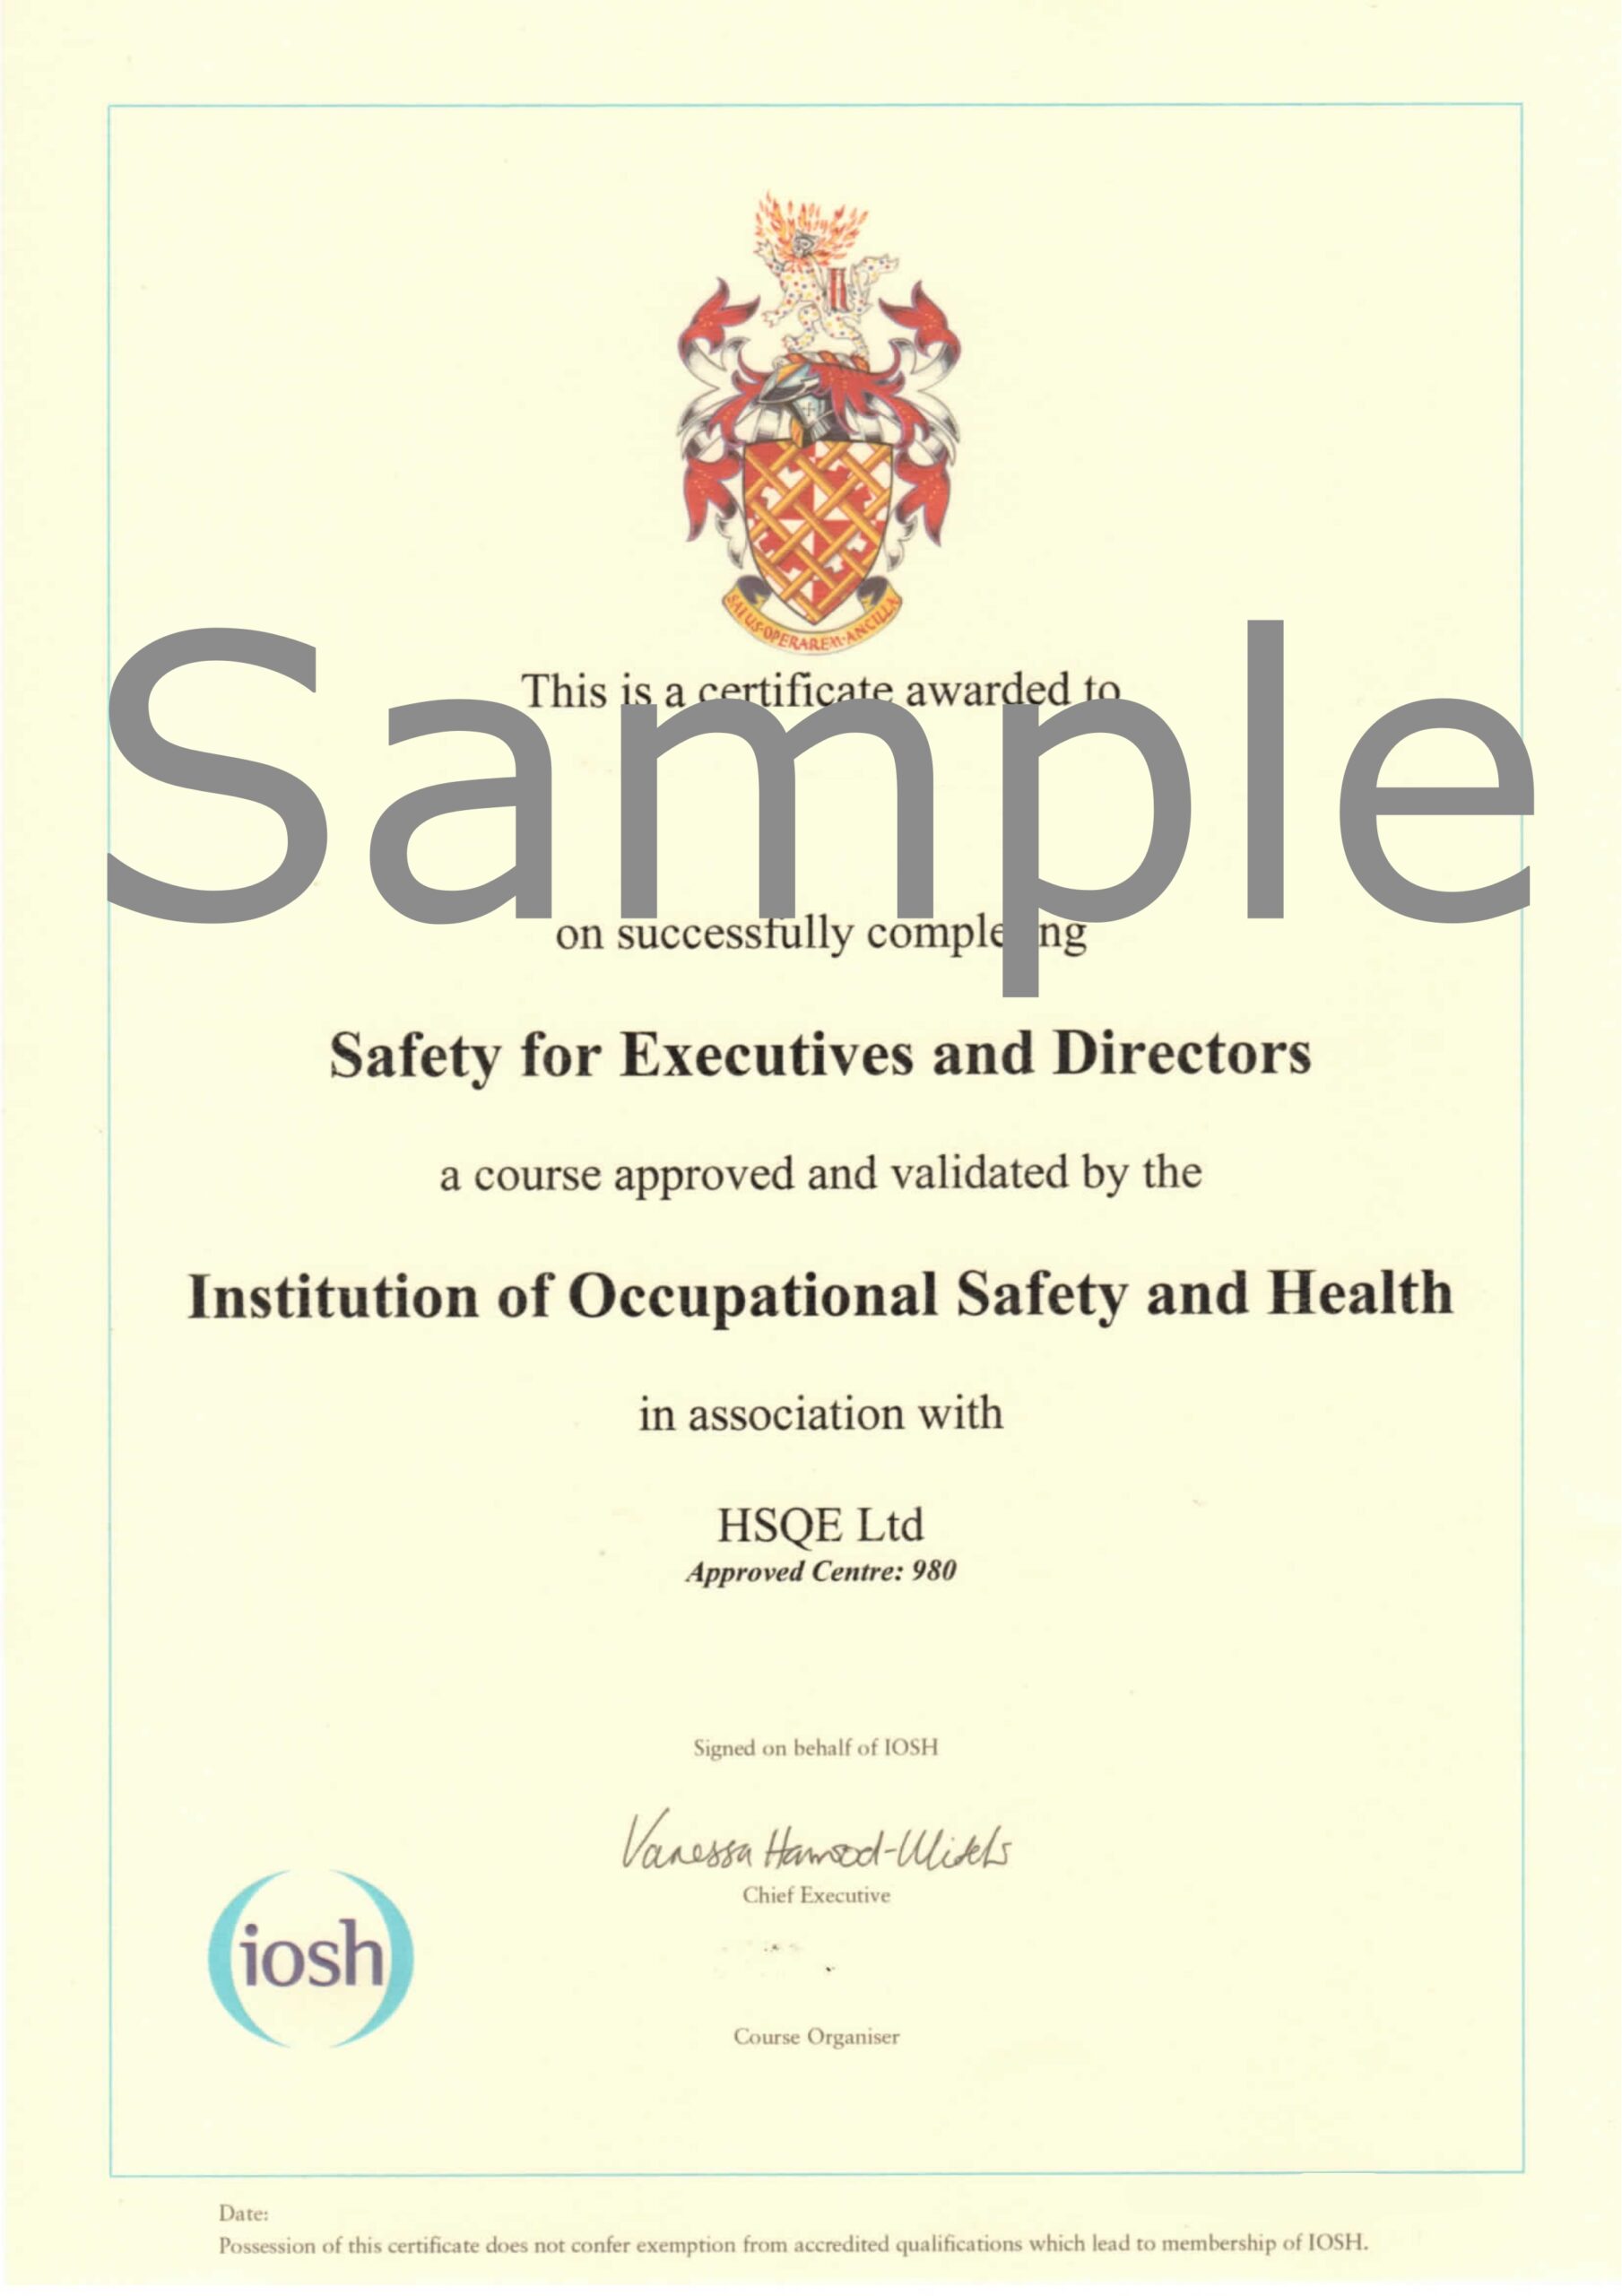 IOSH Safety for Executives and Directors Online Training Course Certificate HSQE Vital Skills